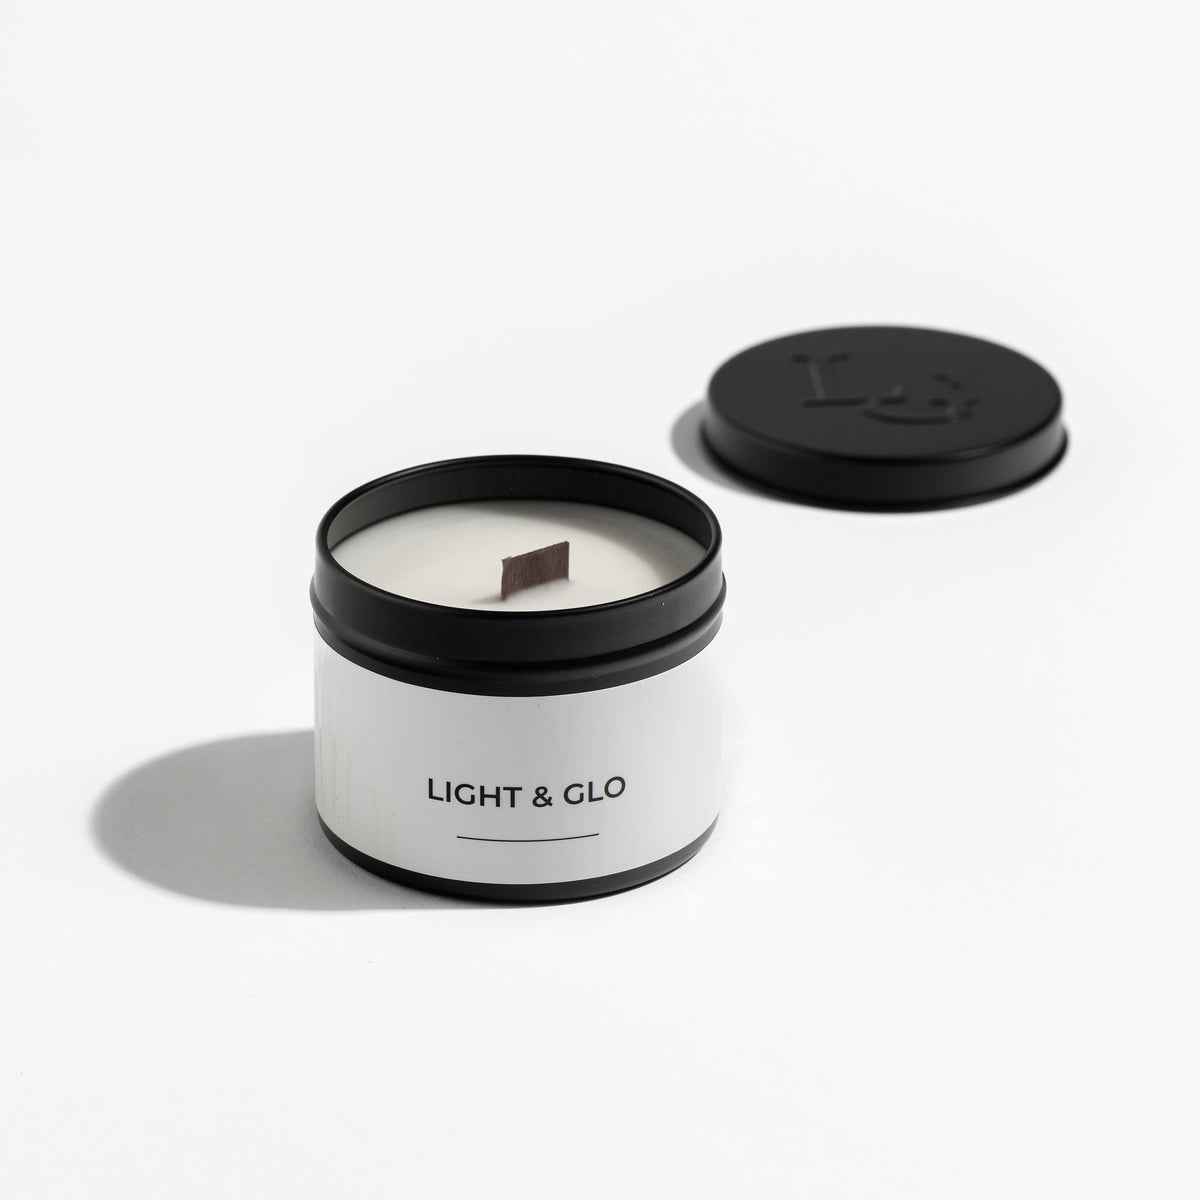 Lemongrass &amp; Persian Lime - Monochrome Travel Candle | Luxury Candles &amp; Home Fragrances by Light + Glo